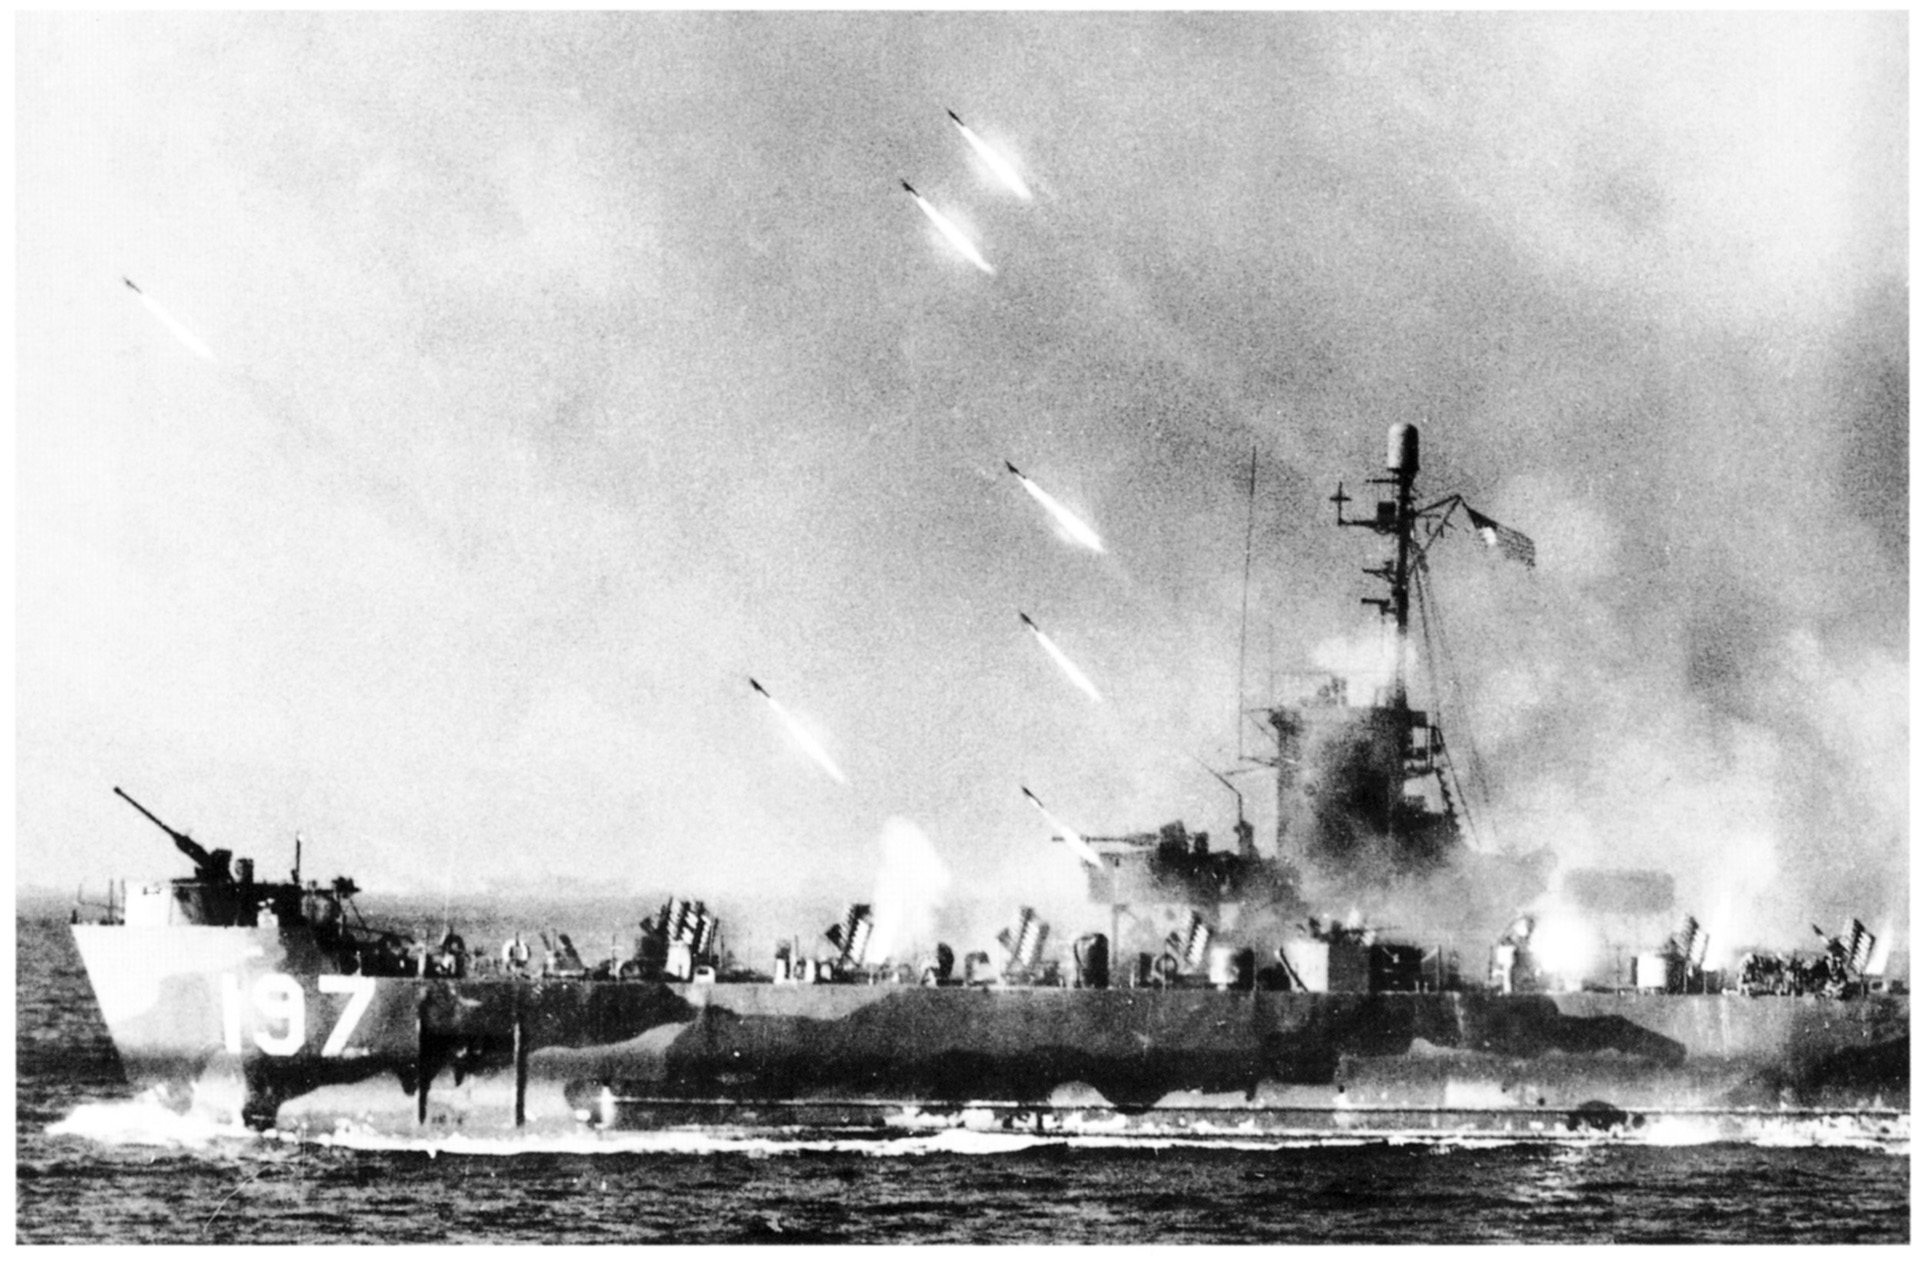 A U.S. warship unleashes a barrage of rockets against Japanese positions on April 1, 1945.